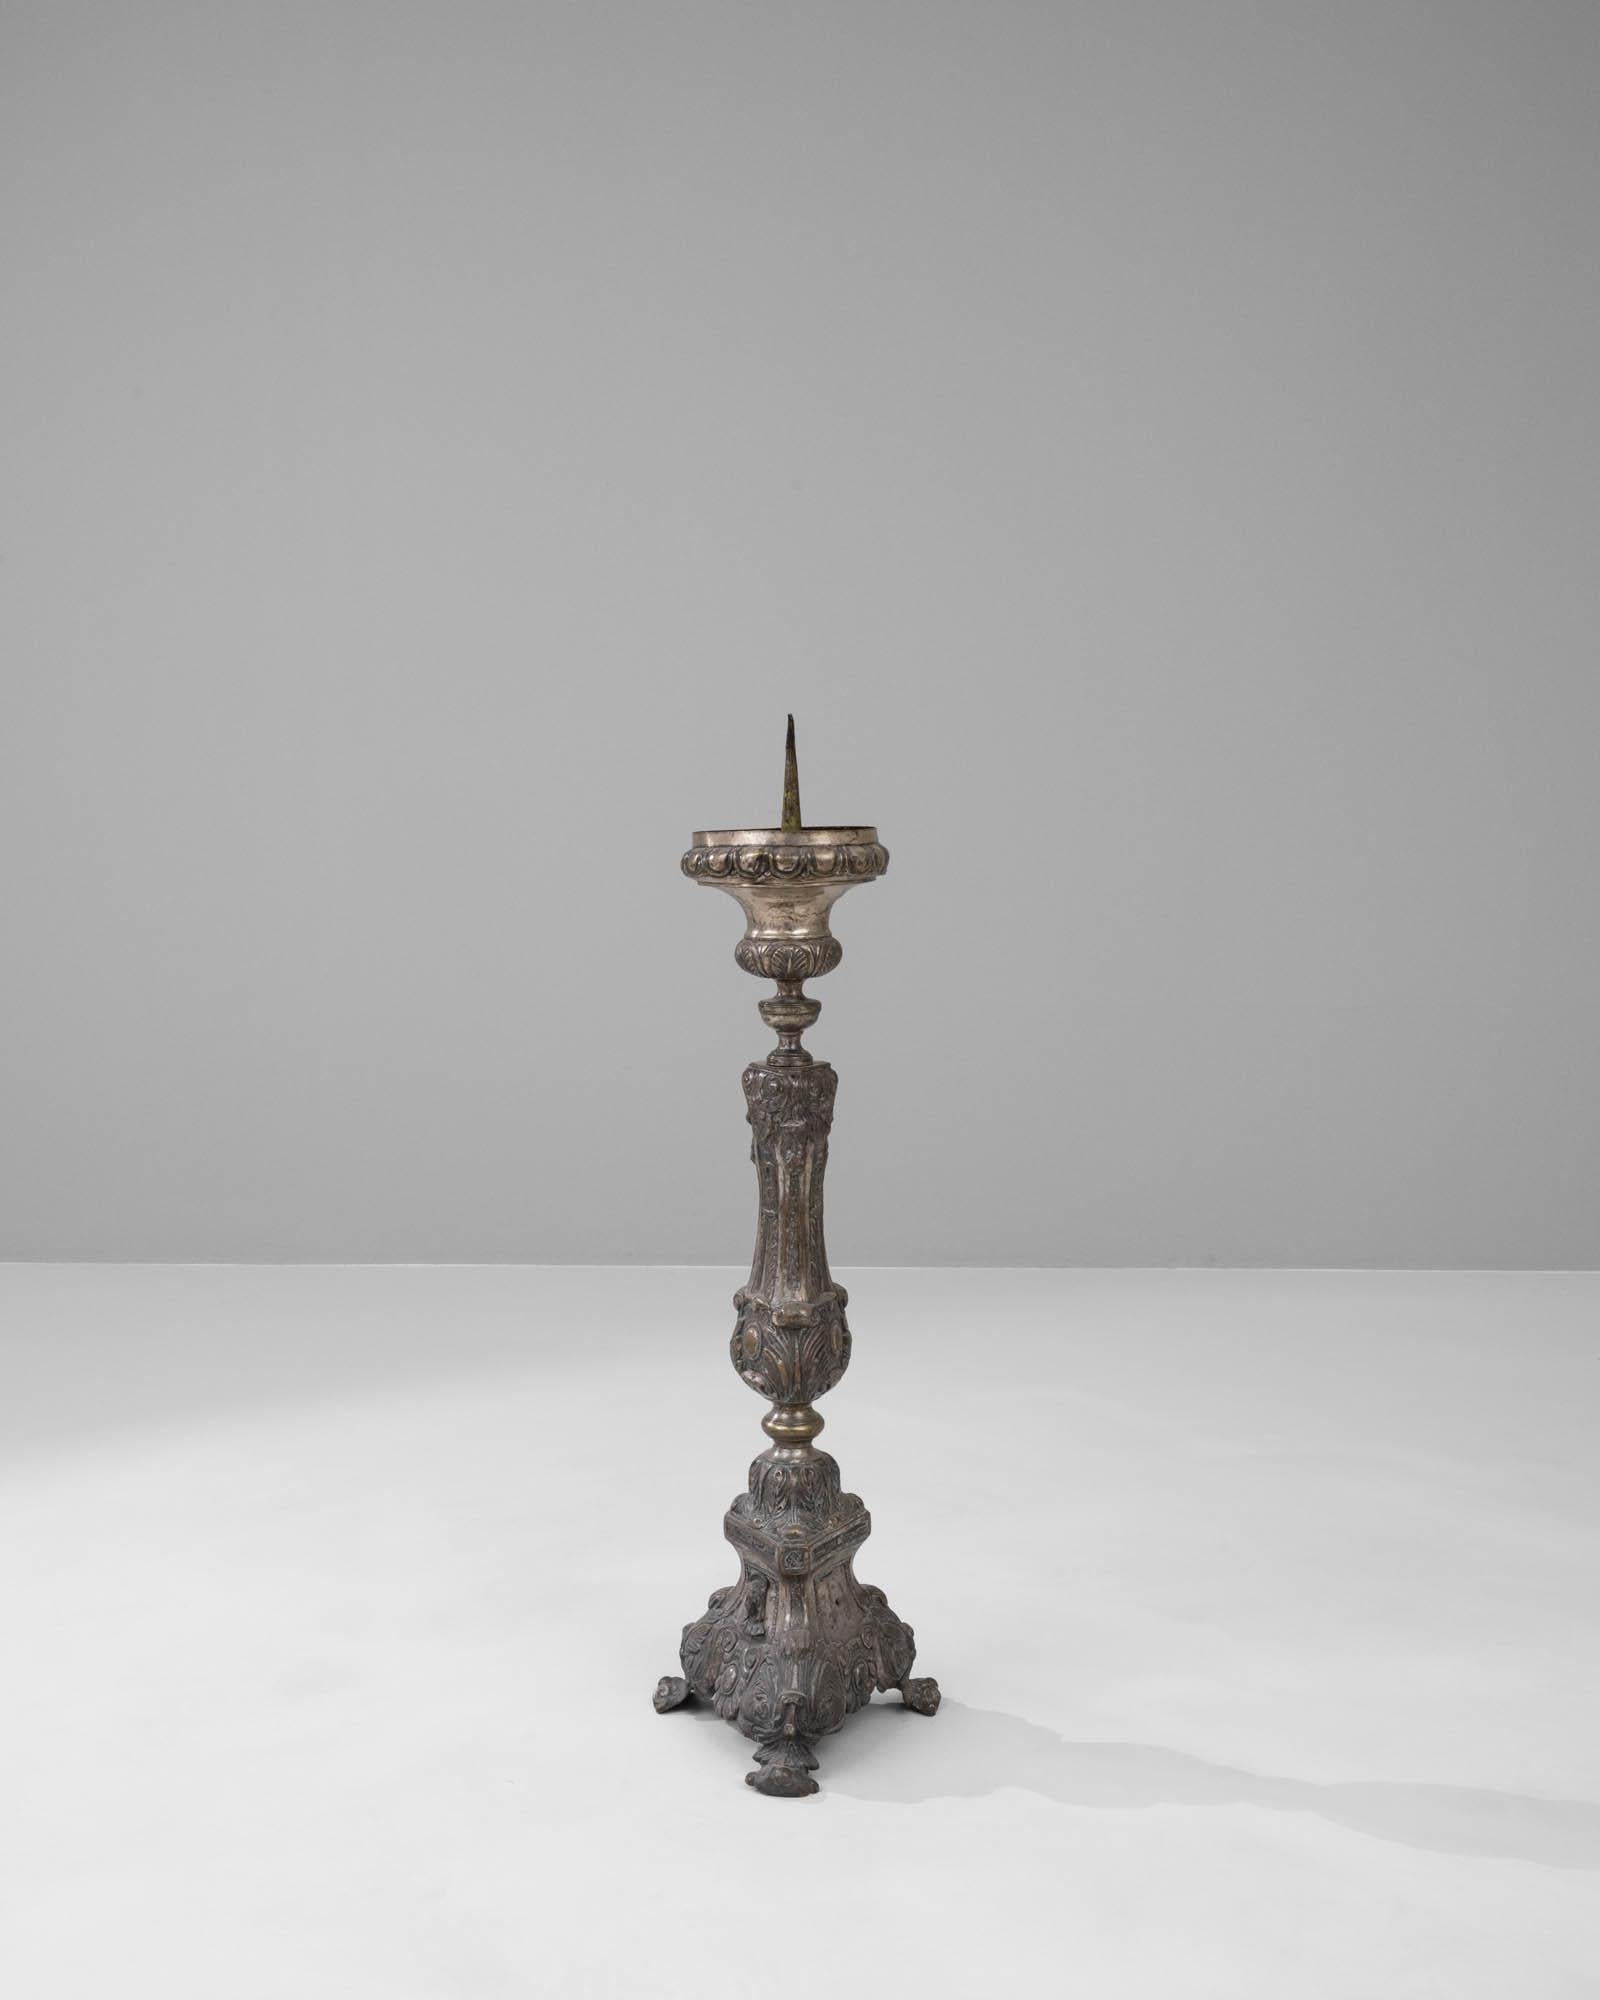 This 20th-century French metal candlestick is an exquisite piece of decor, steeped in ornamental beauty and classic charm. The intricate detailing on its shaft and base reflects the grandeur of Baroque design, with flourishes and curlicues that